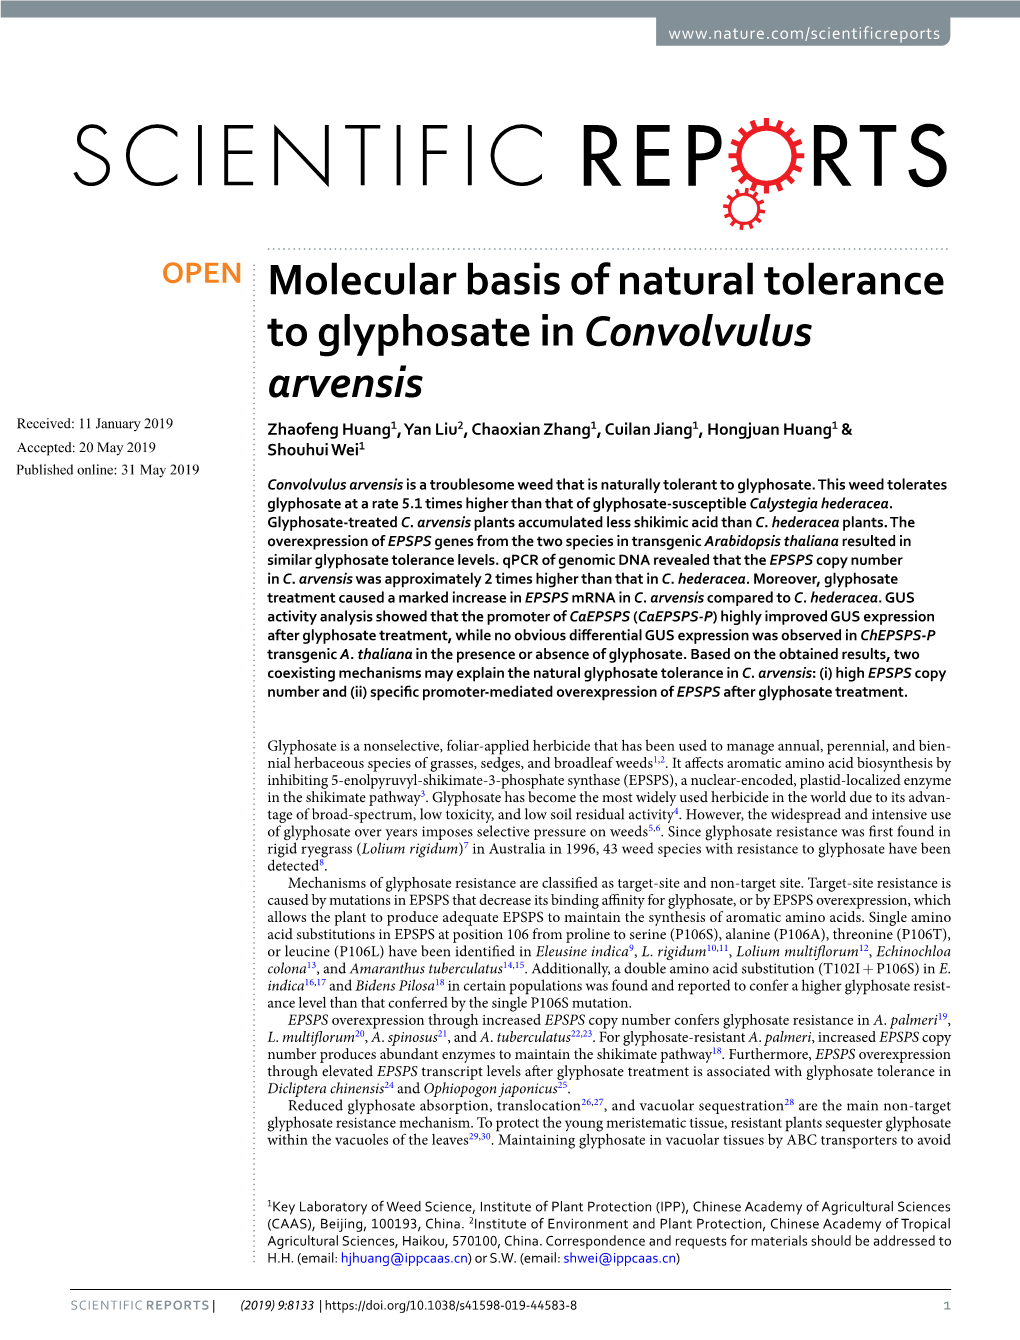 Molecular Basis of Natural Tolerance to Glyphosate in Convolvulus Arvensis